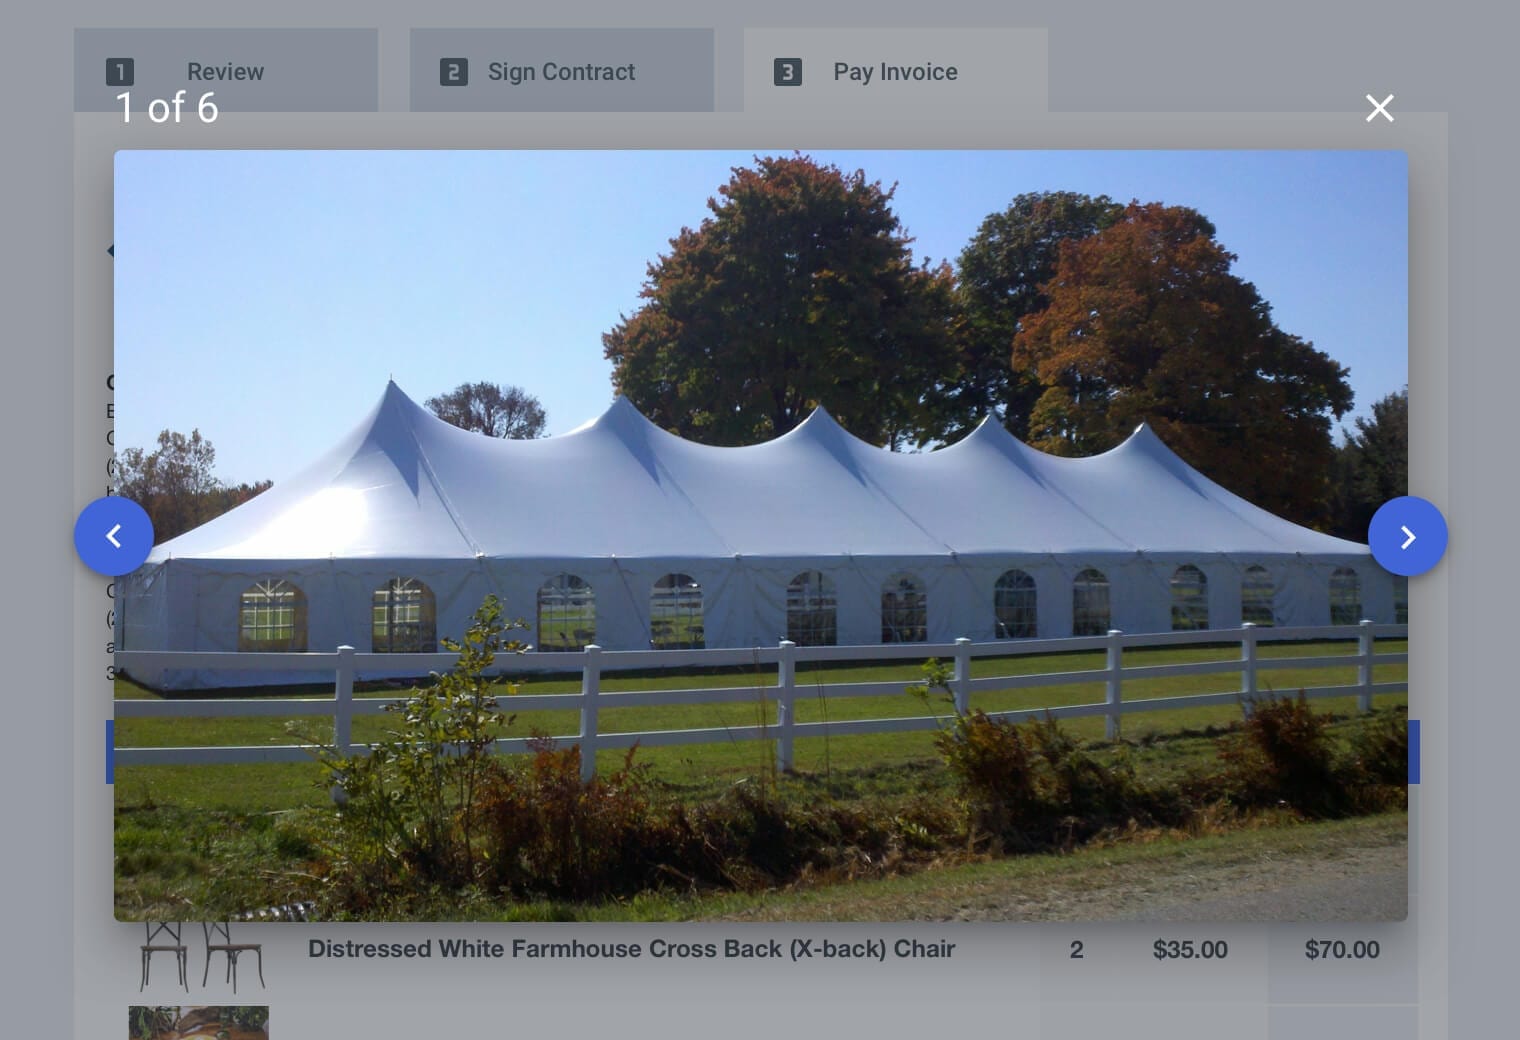 Client view of a tent contract in Goodshuffle Pro, a rental management software